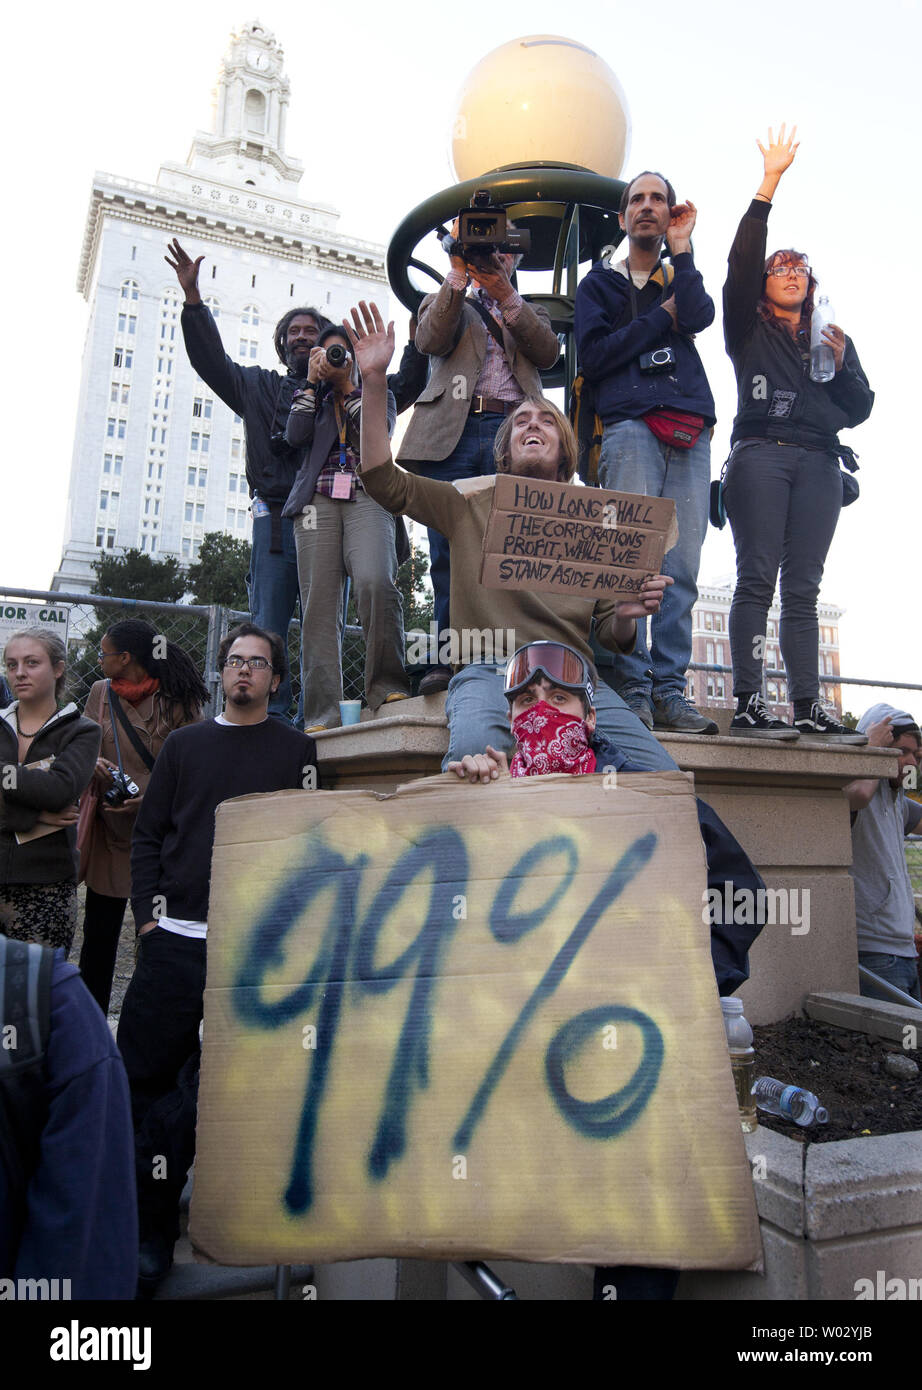 Occupy Oakland protesters listen to speakers in front of Frank H. Ogawa Plaza in Oakland, California on October 26, 2011.  More than a thousand gathered the night after police used tear gas and rubber bullets to disperse the demonstrators.      UPI/Terry Schmitt Stock Photo